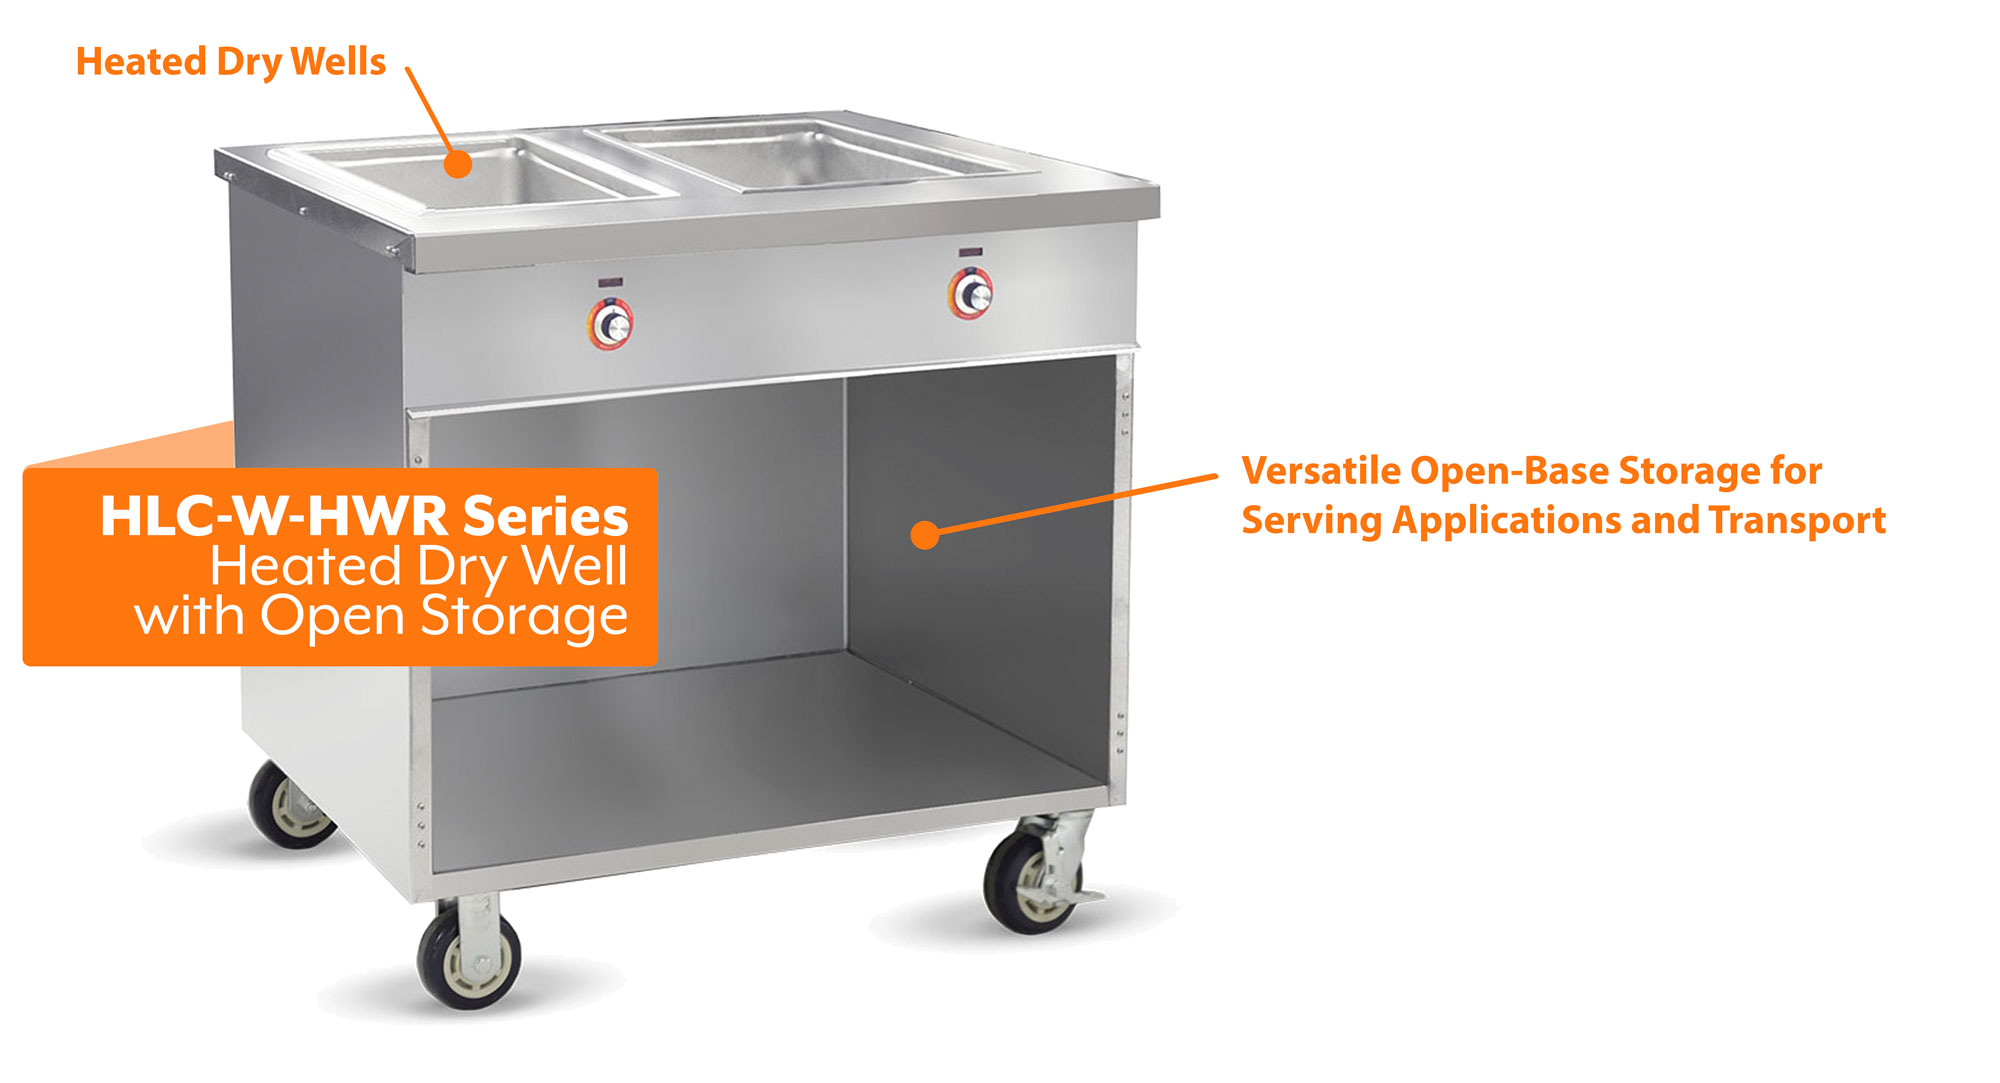 HLC-W-HWR Series: Heated Dry Serving Well with Open Base Storage Below